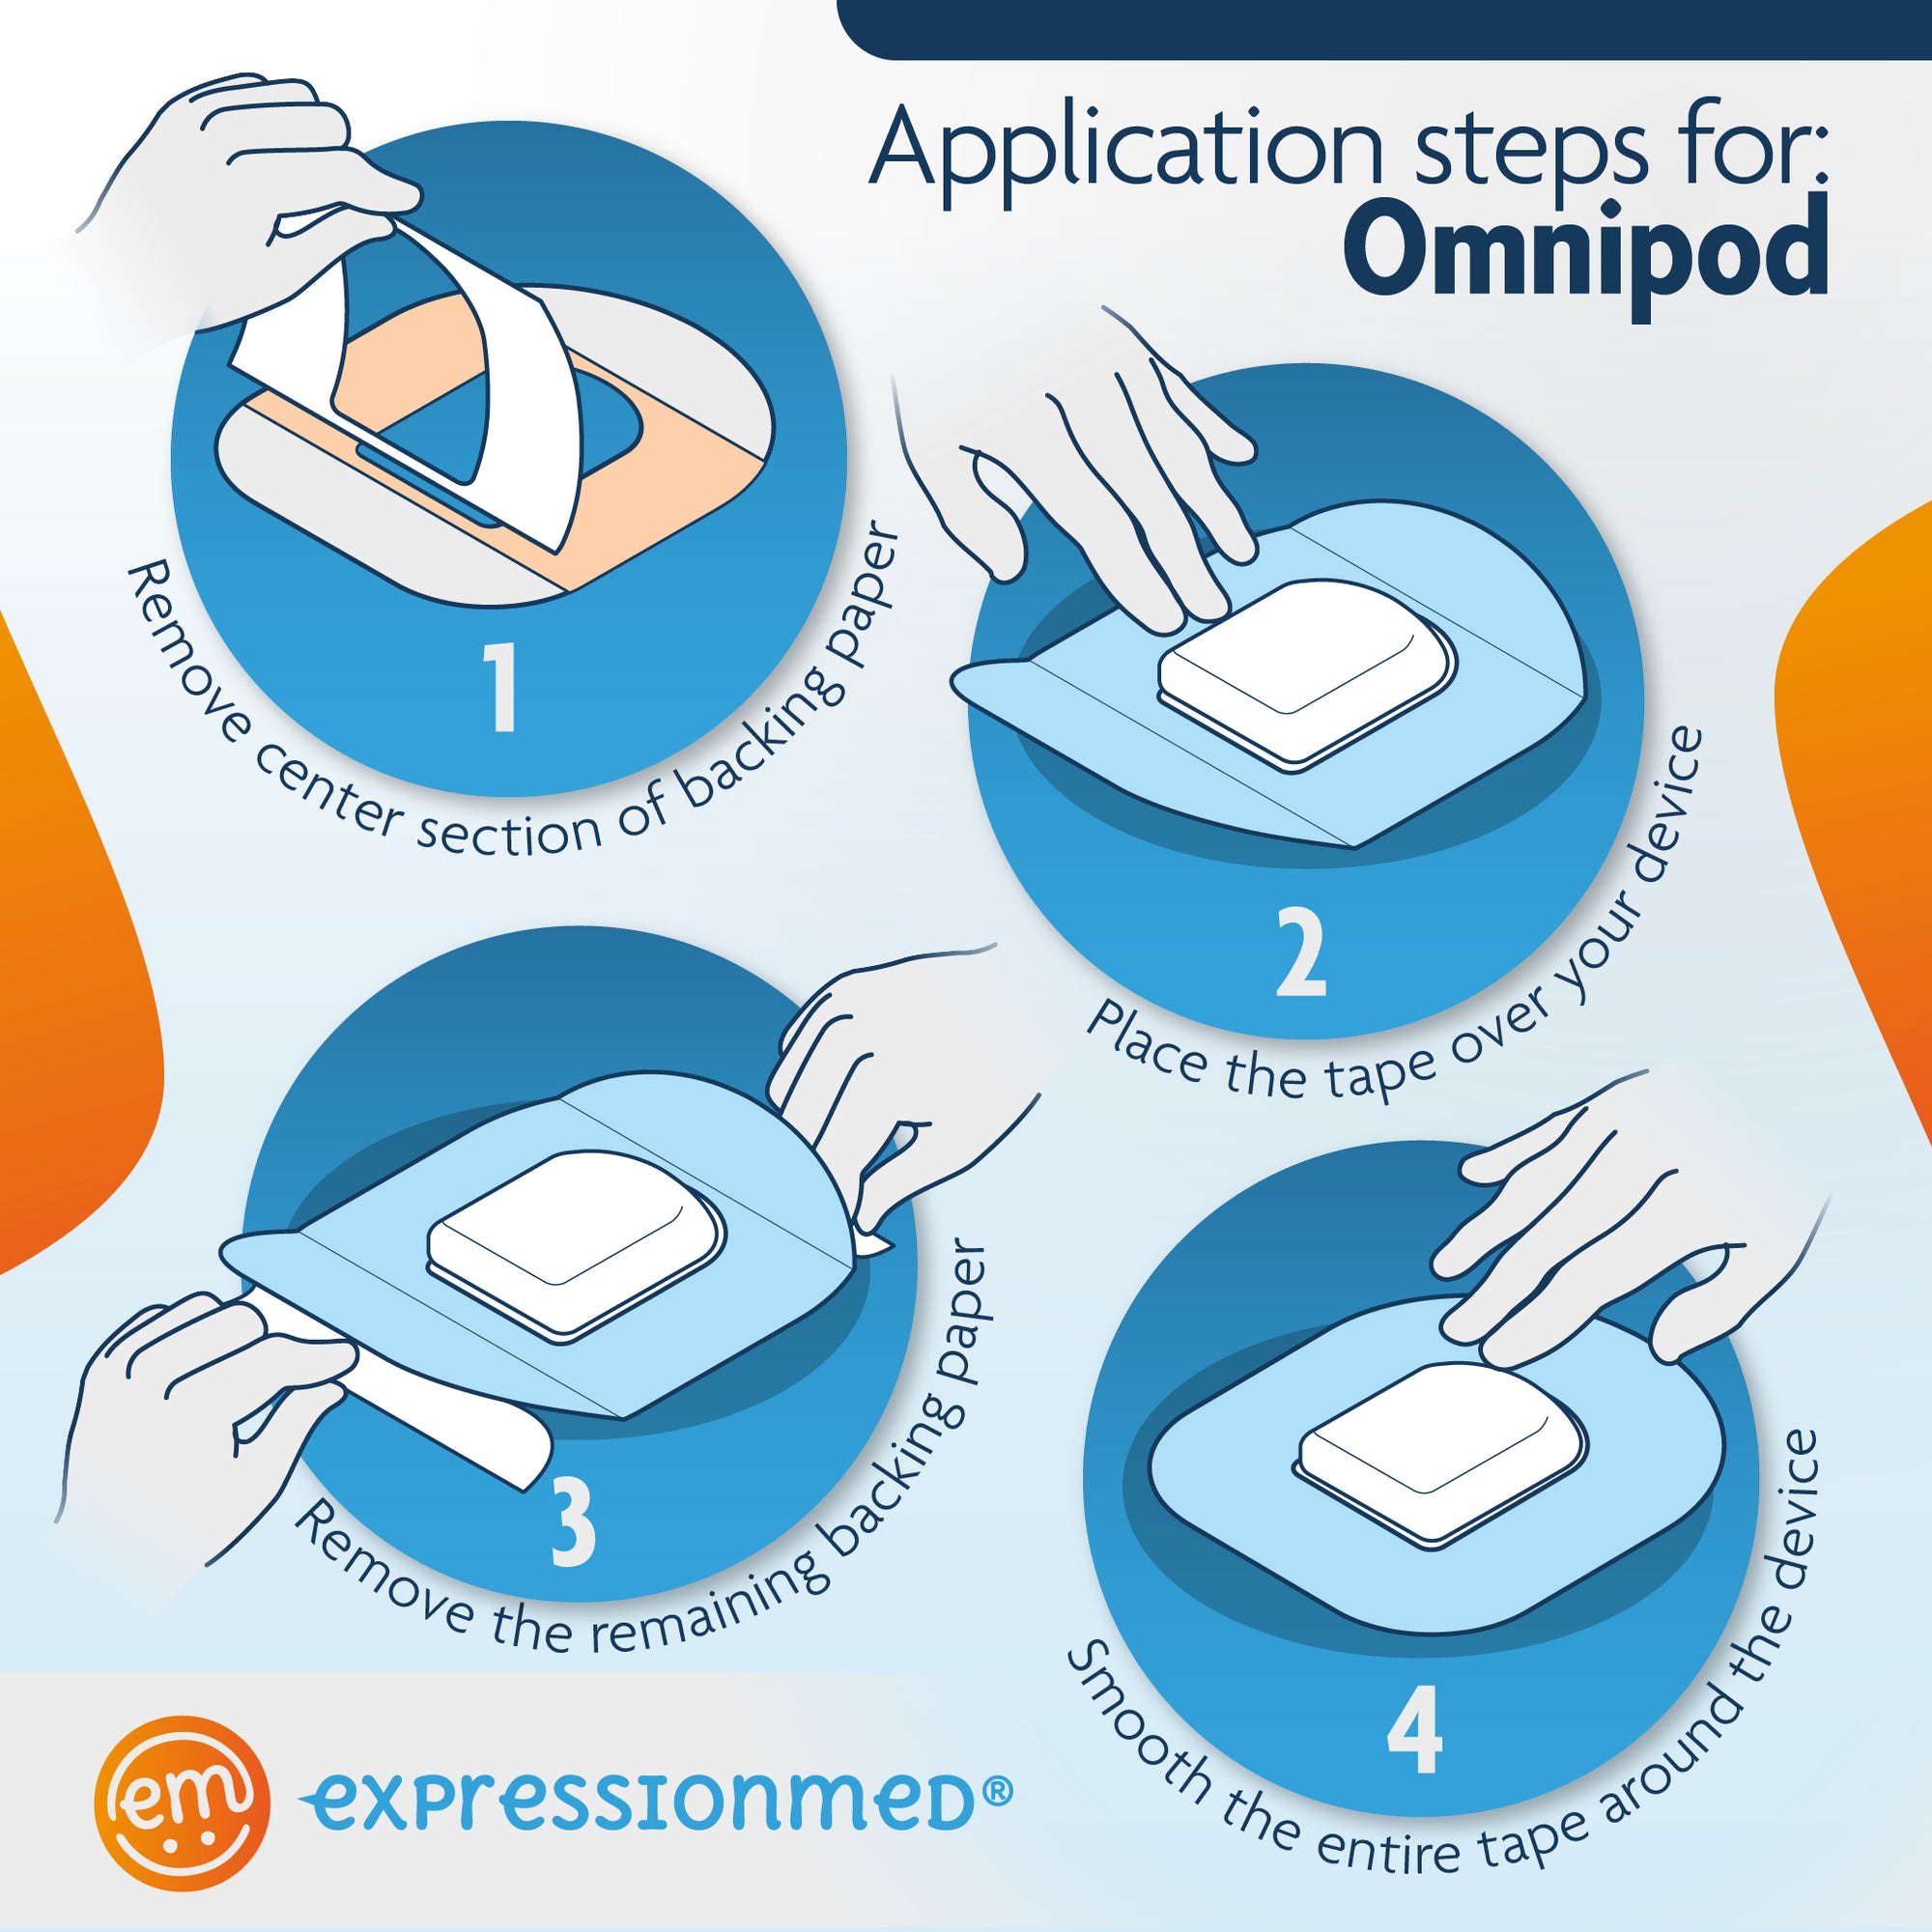 Application Instructions. 1. Prep skin with soap and water. 2. Remove Middle Section and lay center hole over device. 3. Peel off both end sections and smooth down on skin. To remove, hold an edge and stretch material off skin.